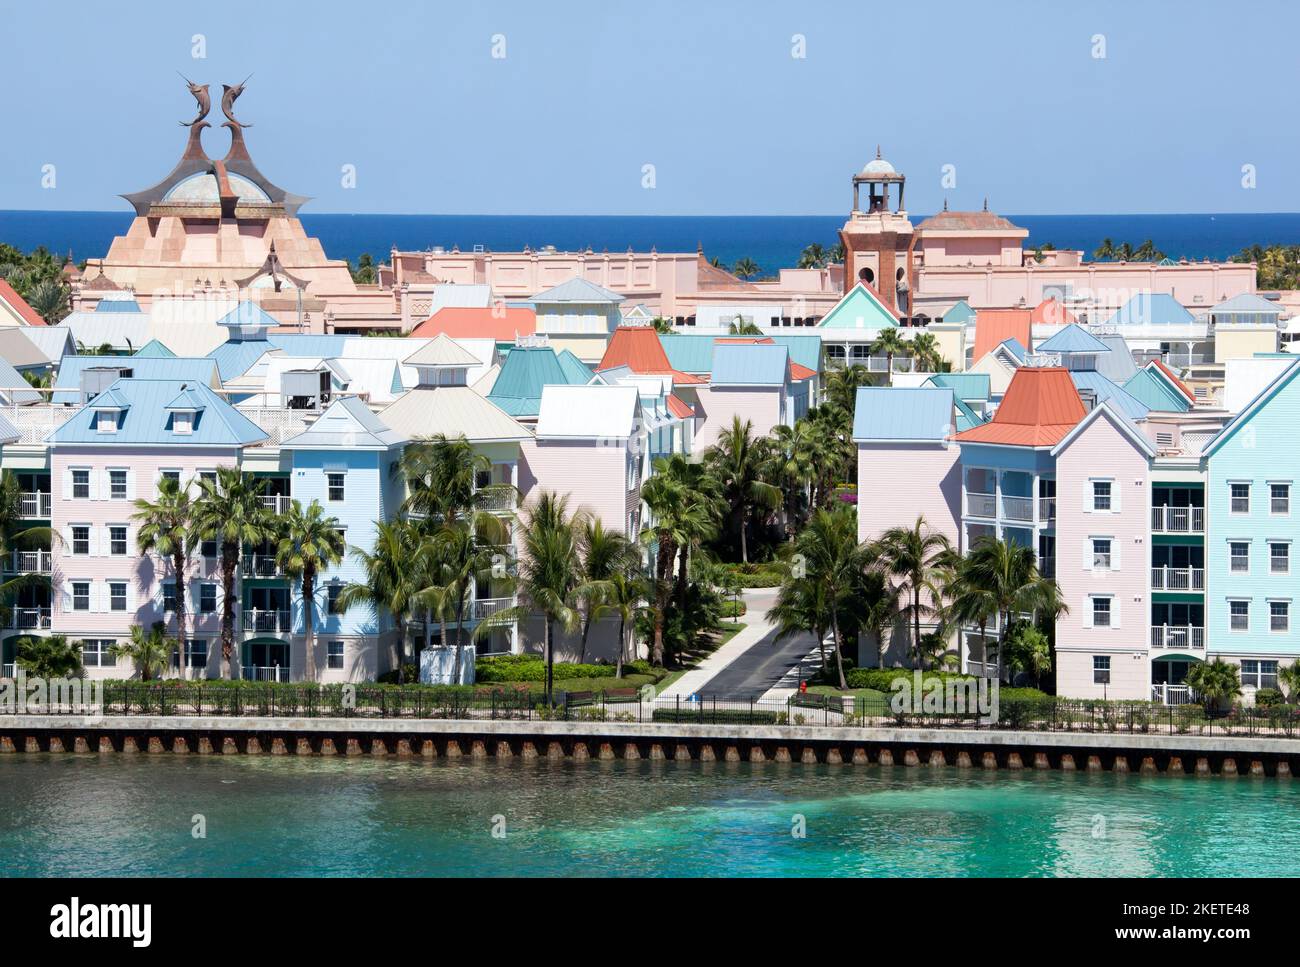 The aerial view of colorful residential houses on Paradise Island, the most popular vacation place in Caribbean (Bahamas). Stock Photo